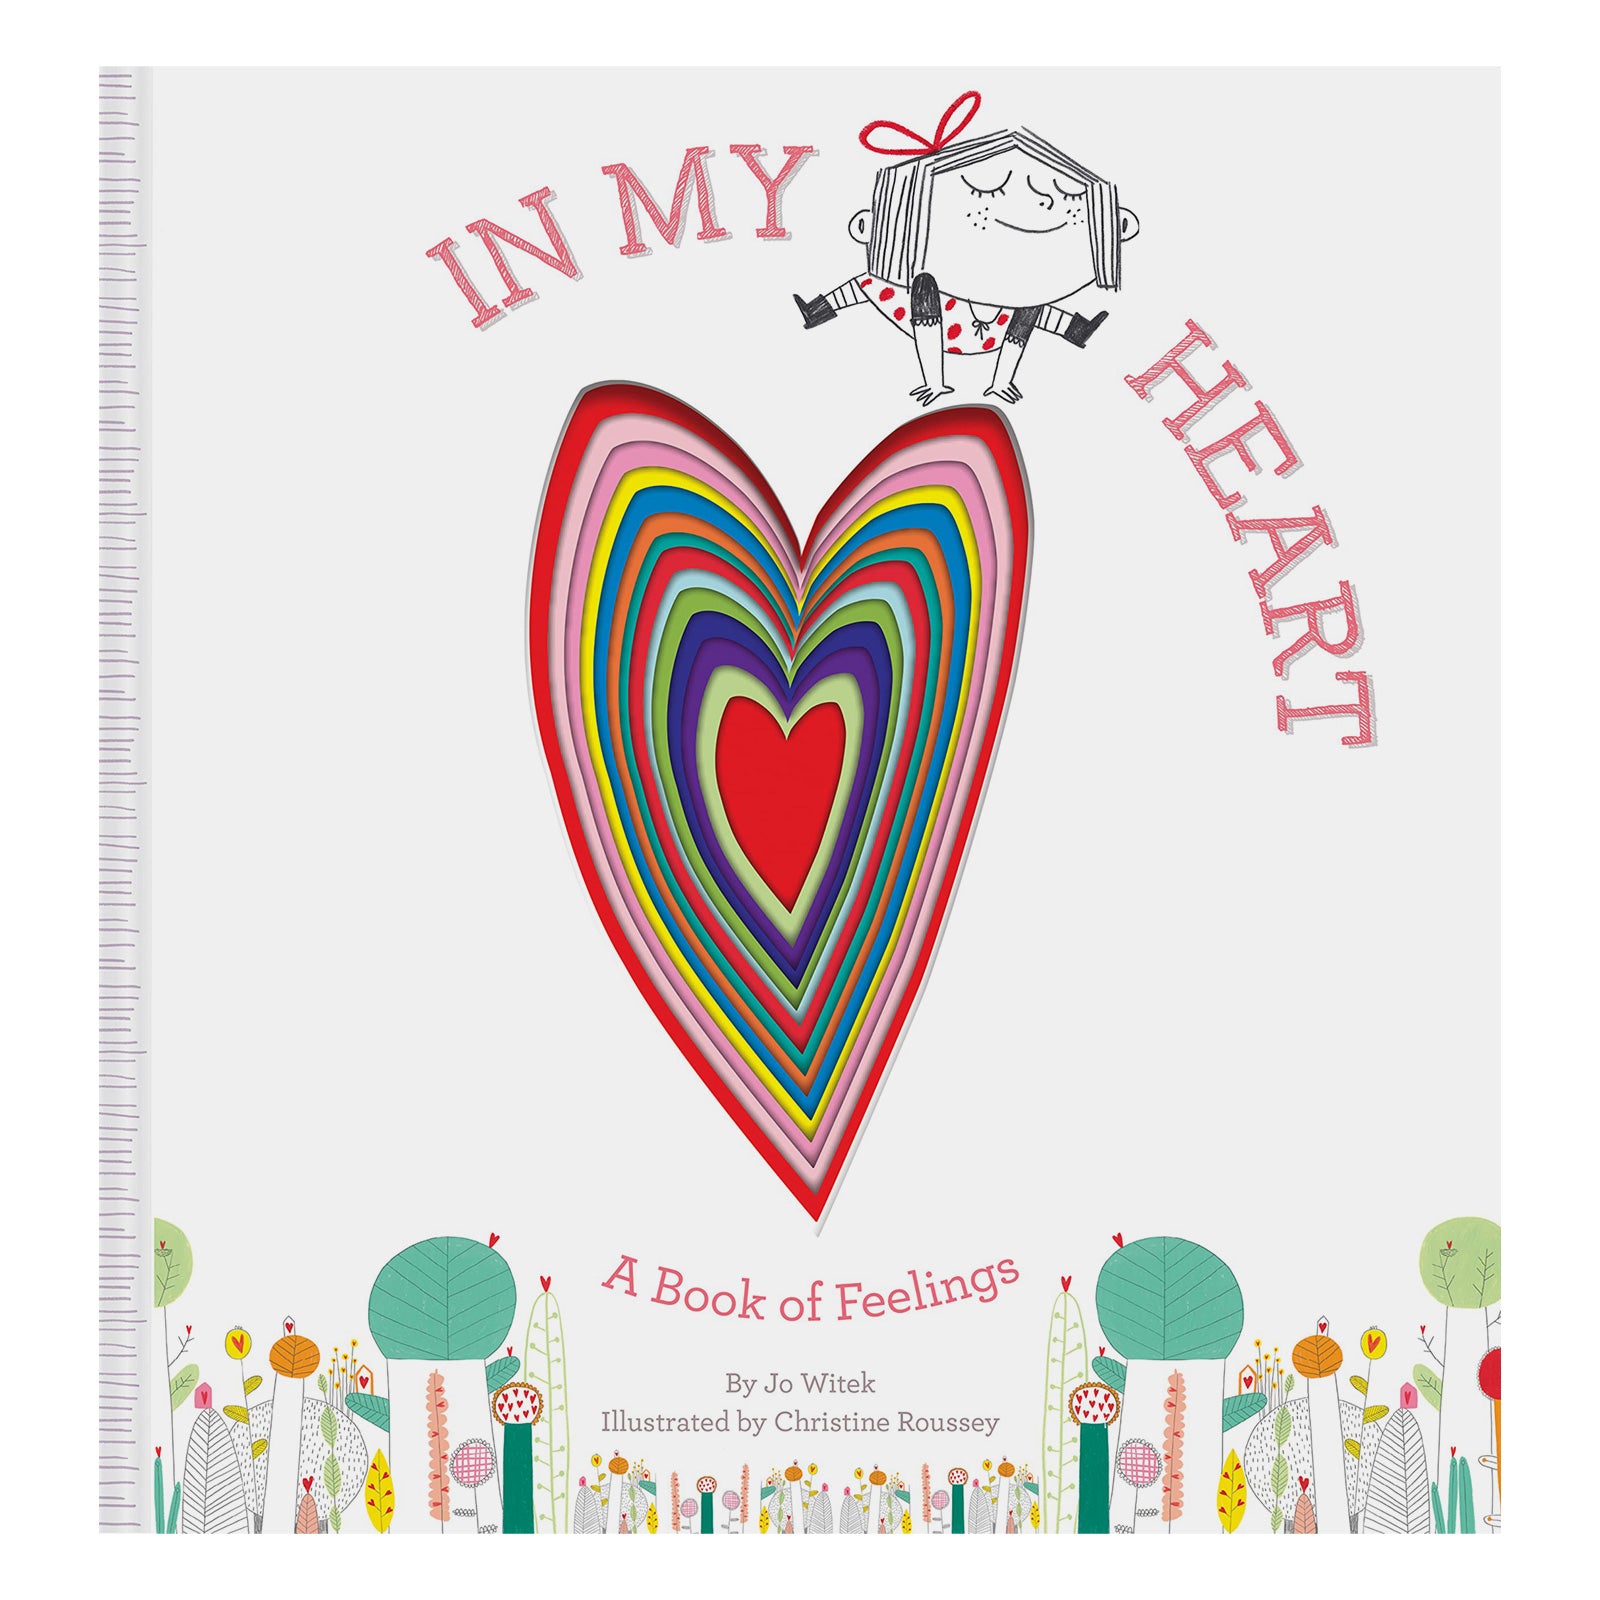 In My Heart's front cover.